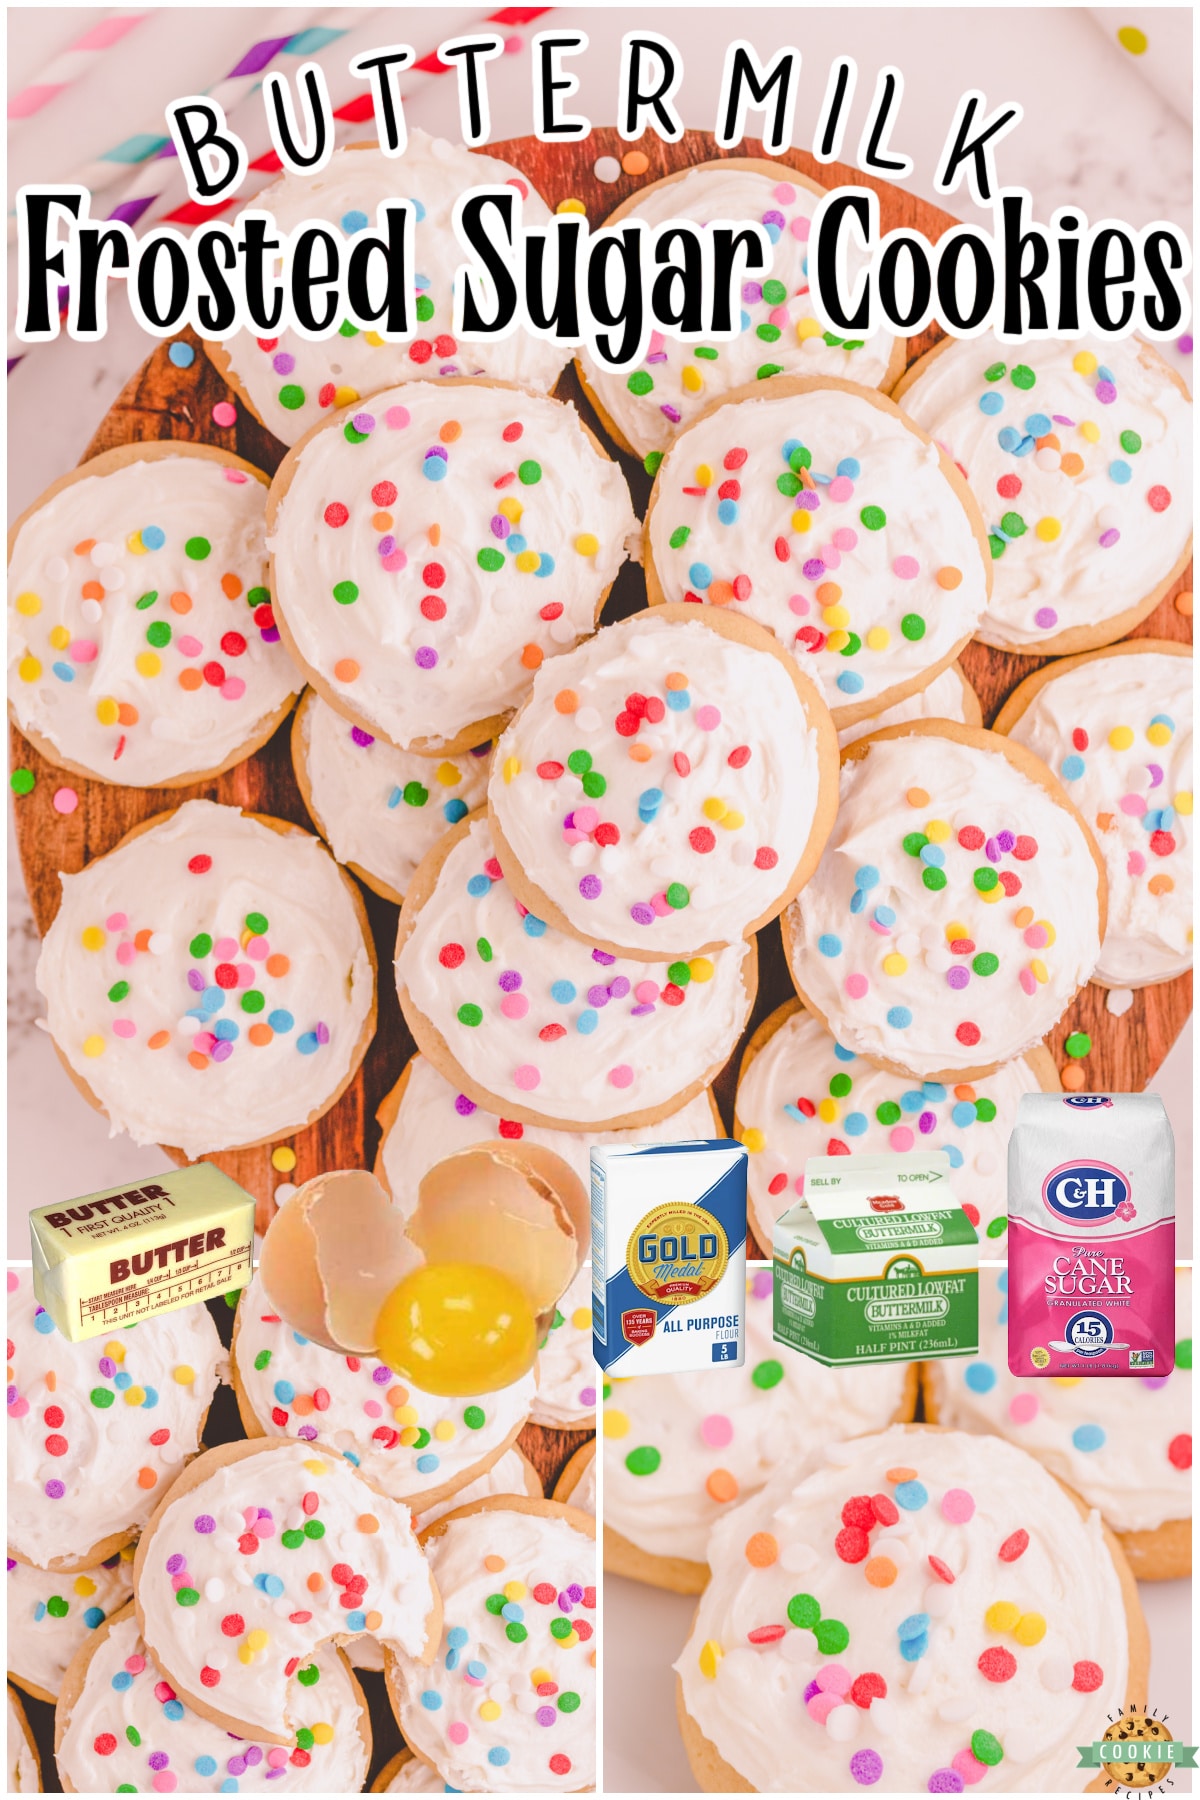 Buttermilk Sugar Cookies are soft, pillowy cookies with a fantastic vanilla buttercream. This sugar cookie with buttermilk recipe is a tried & true family favorite you'll want to keep!